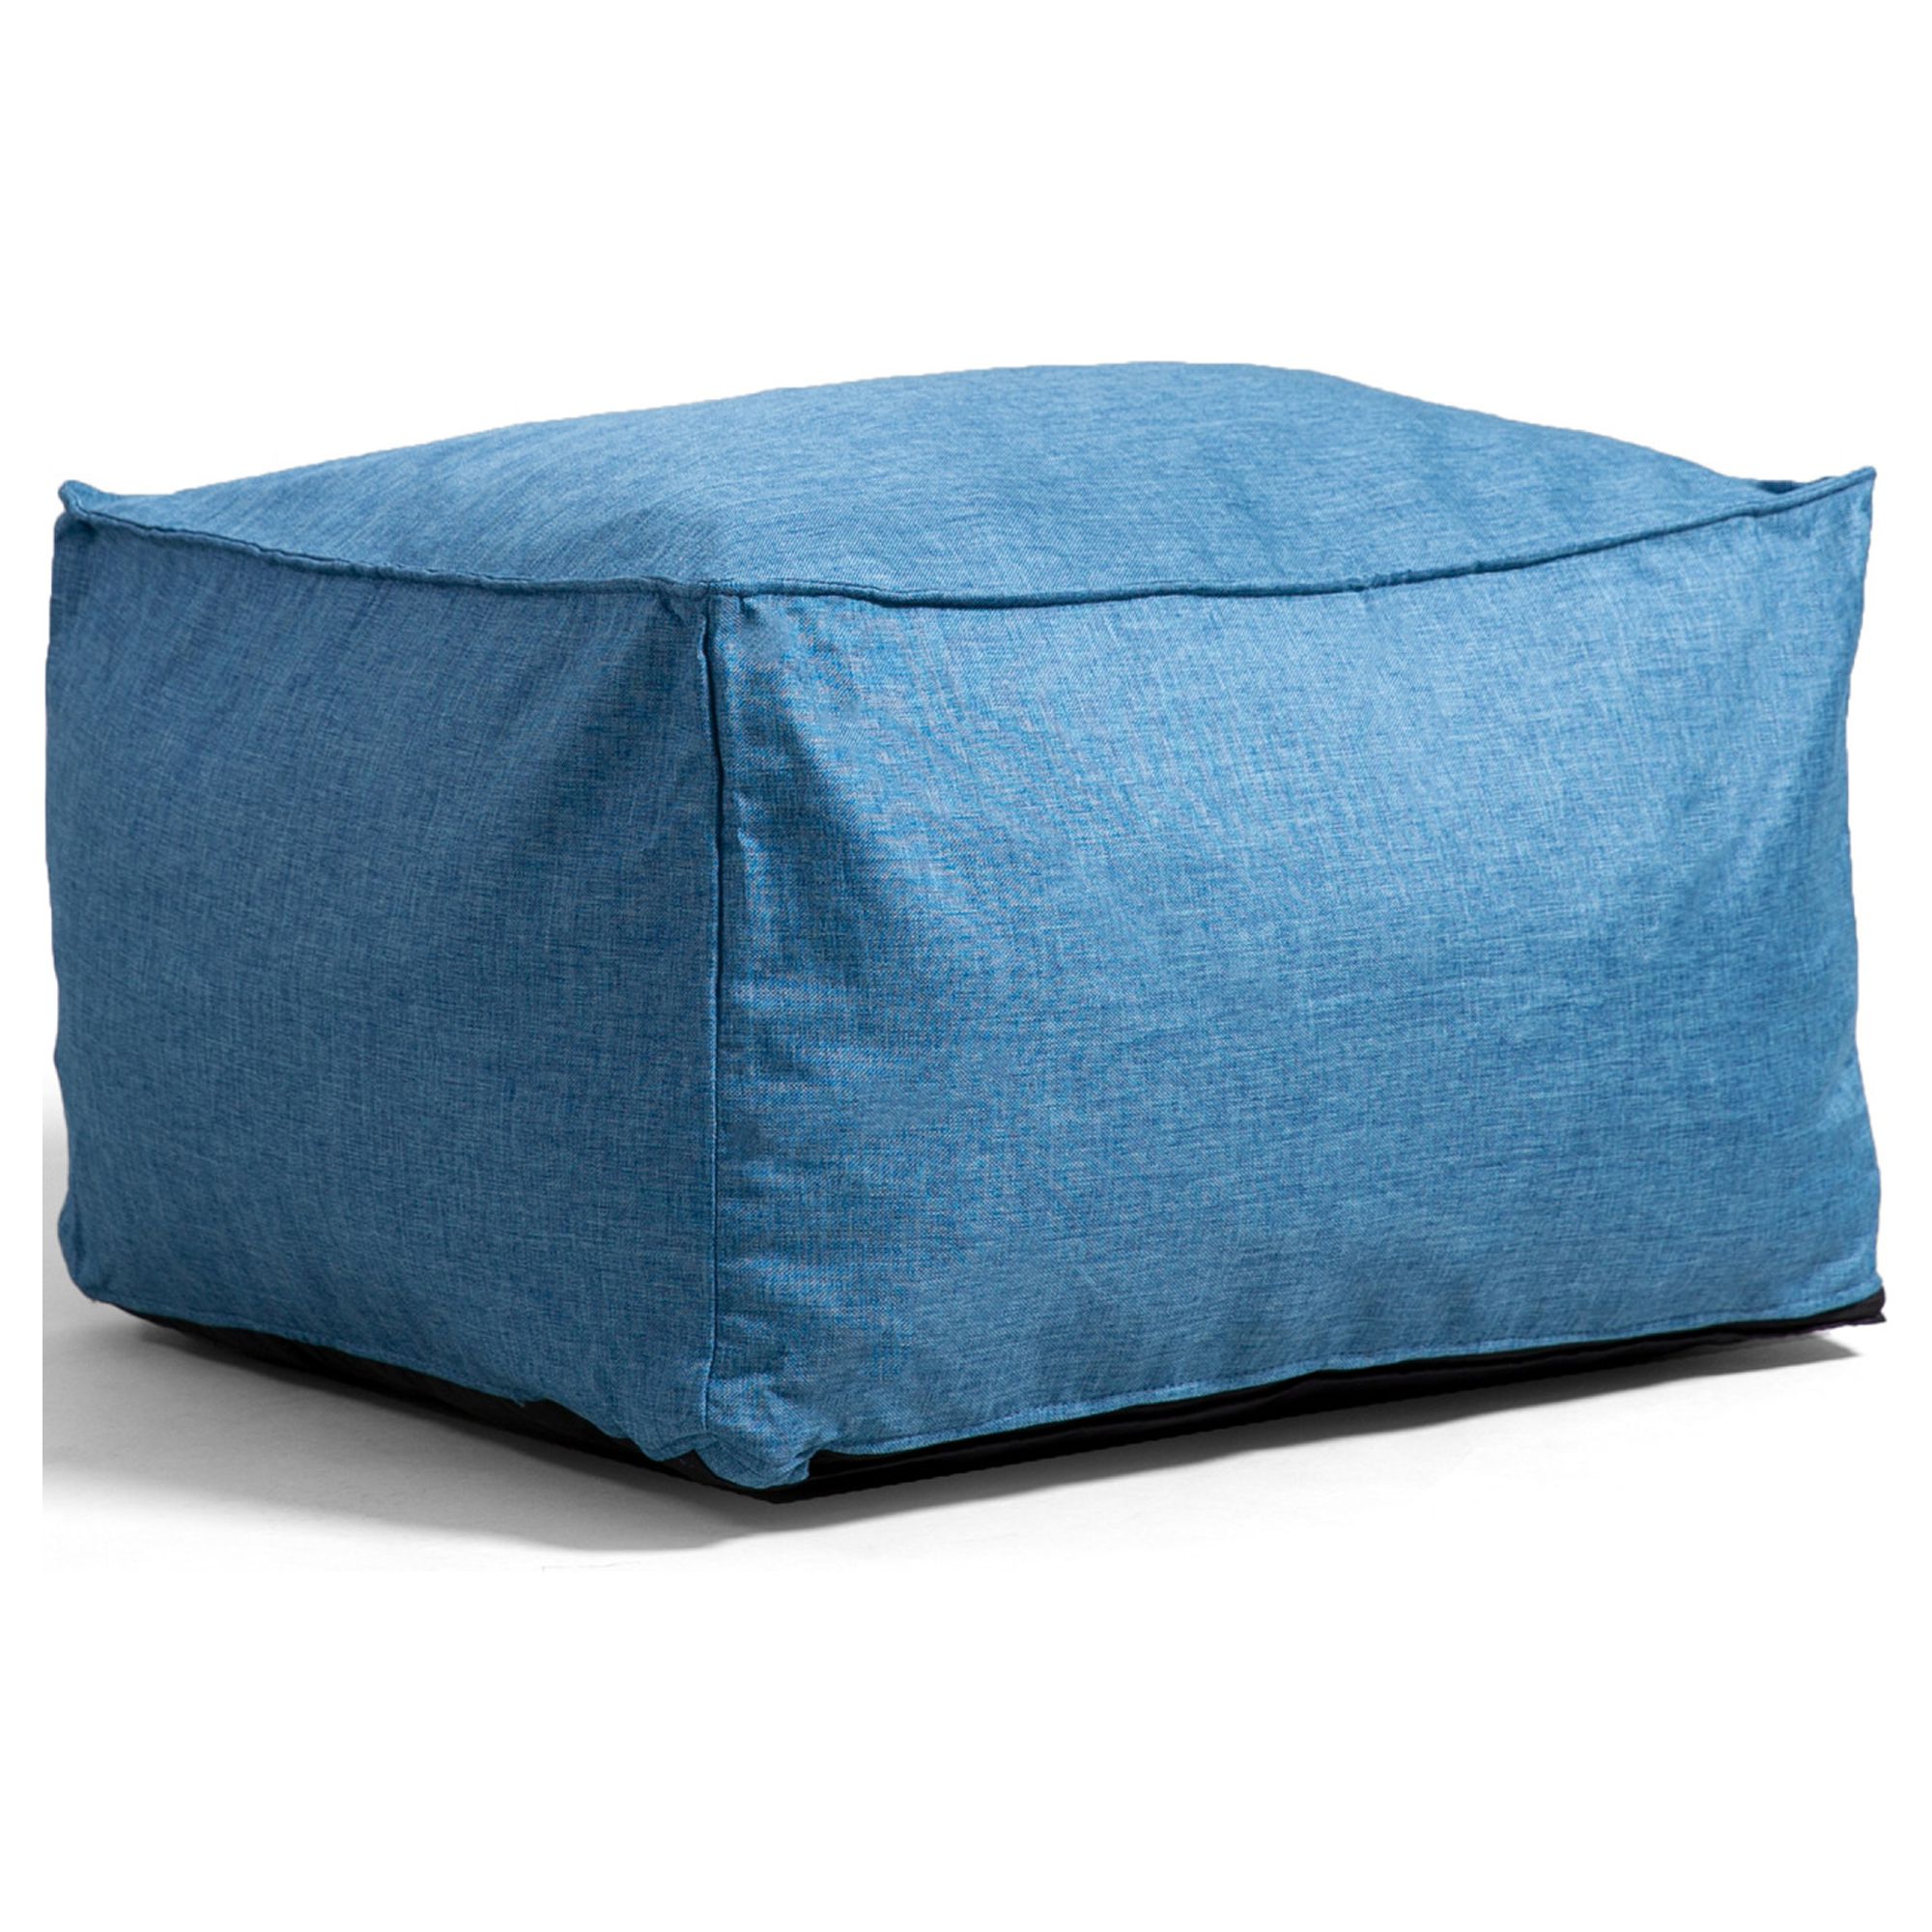 Big Joe Imperial Lounger Ottoman Foam Filled Bean Bag with Removable Cover, Pacific Blue Union, Durable Woven Polyester, 2 feet - image 2 of 8